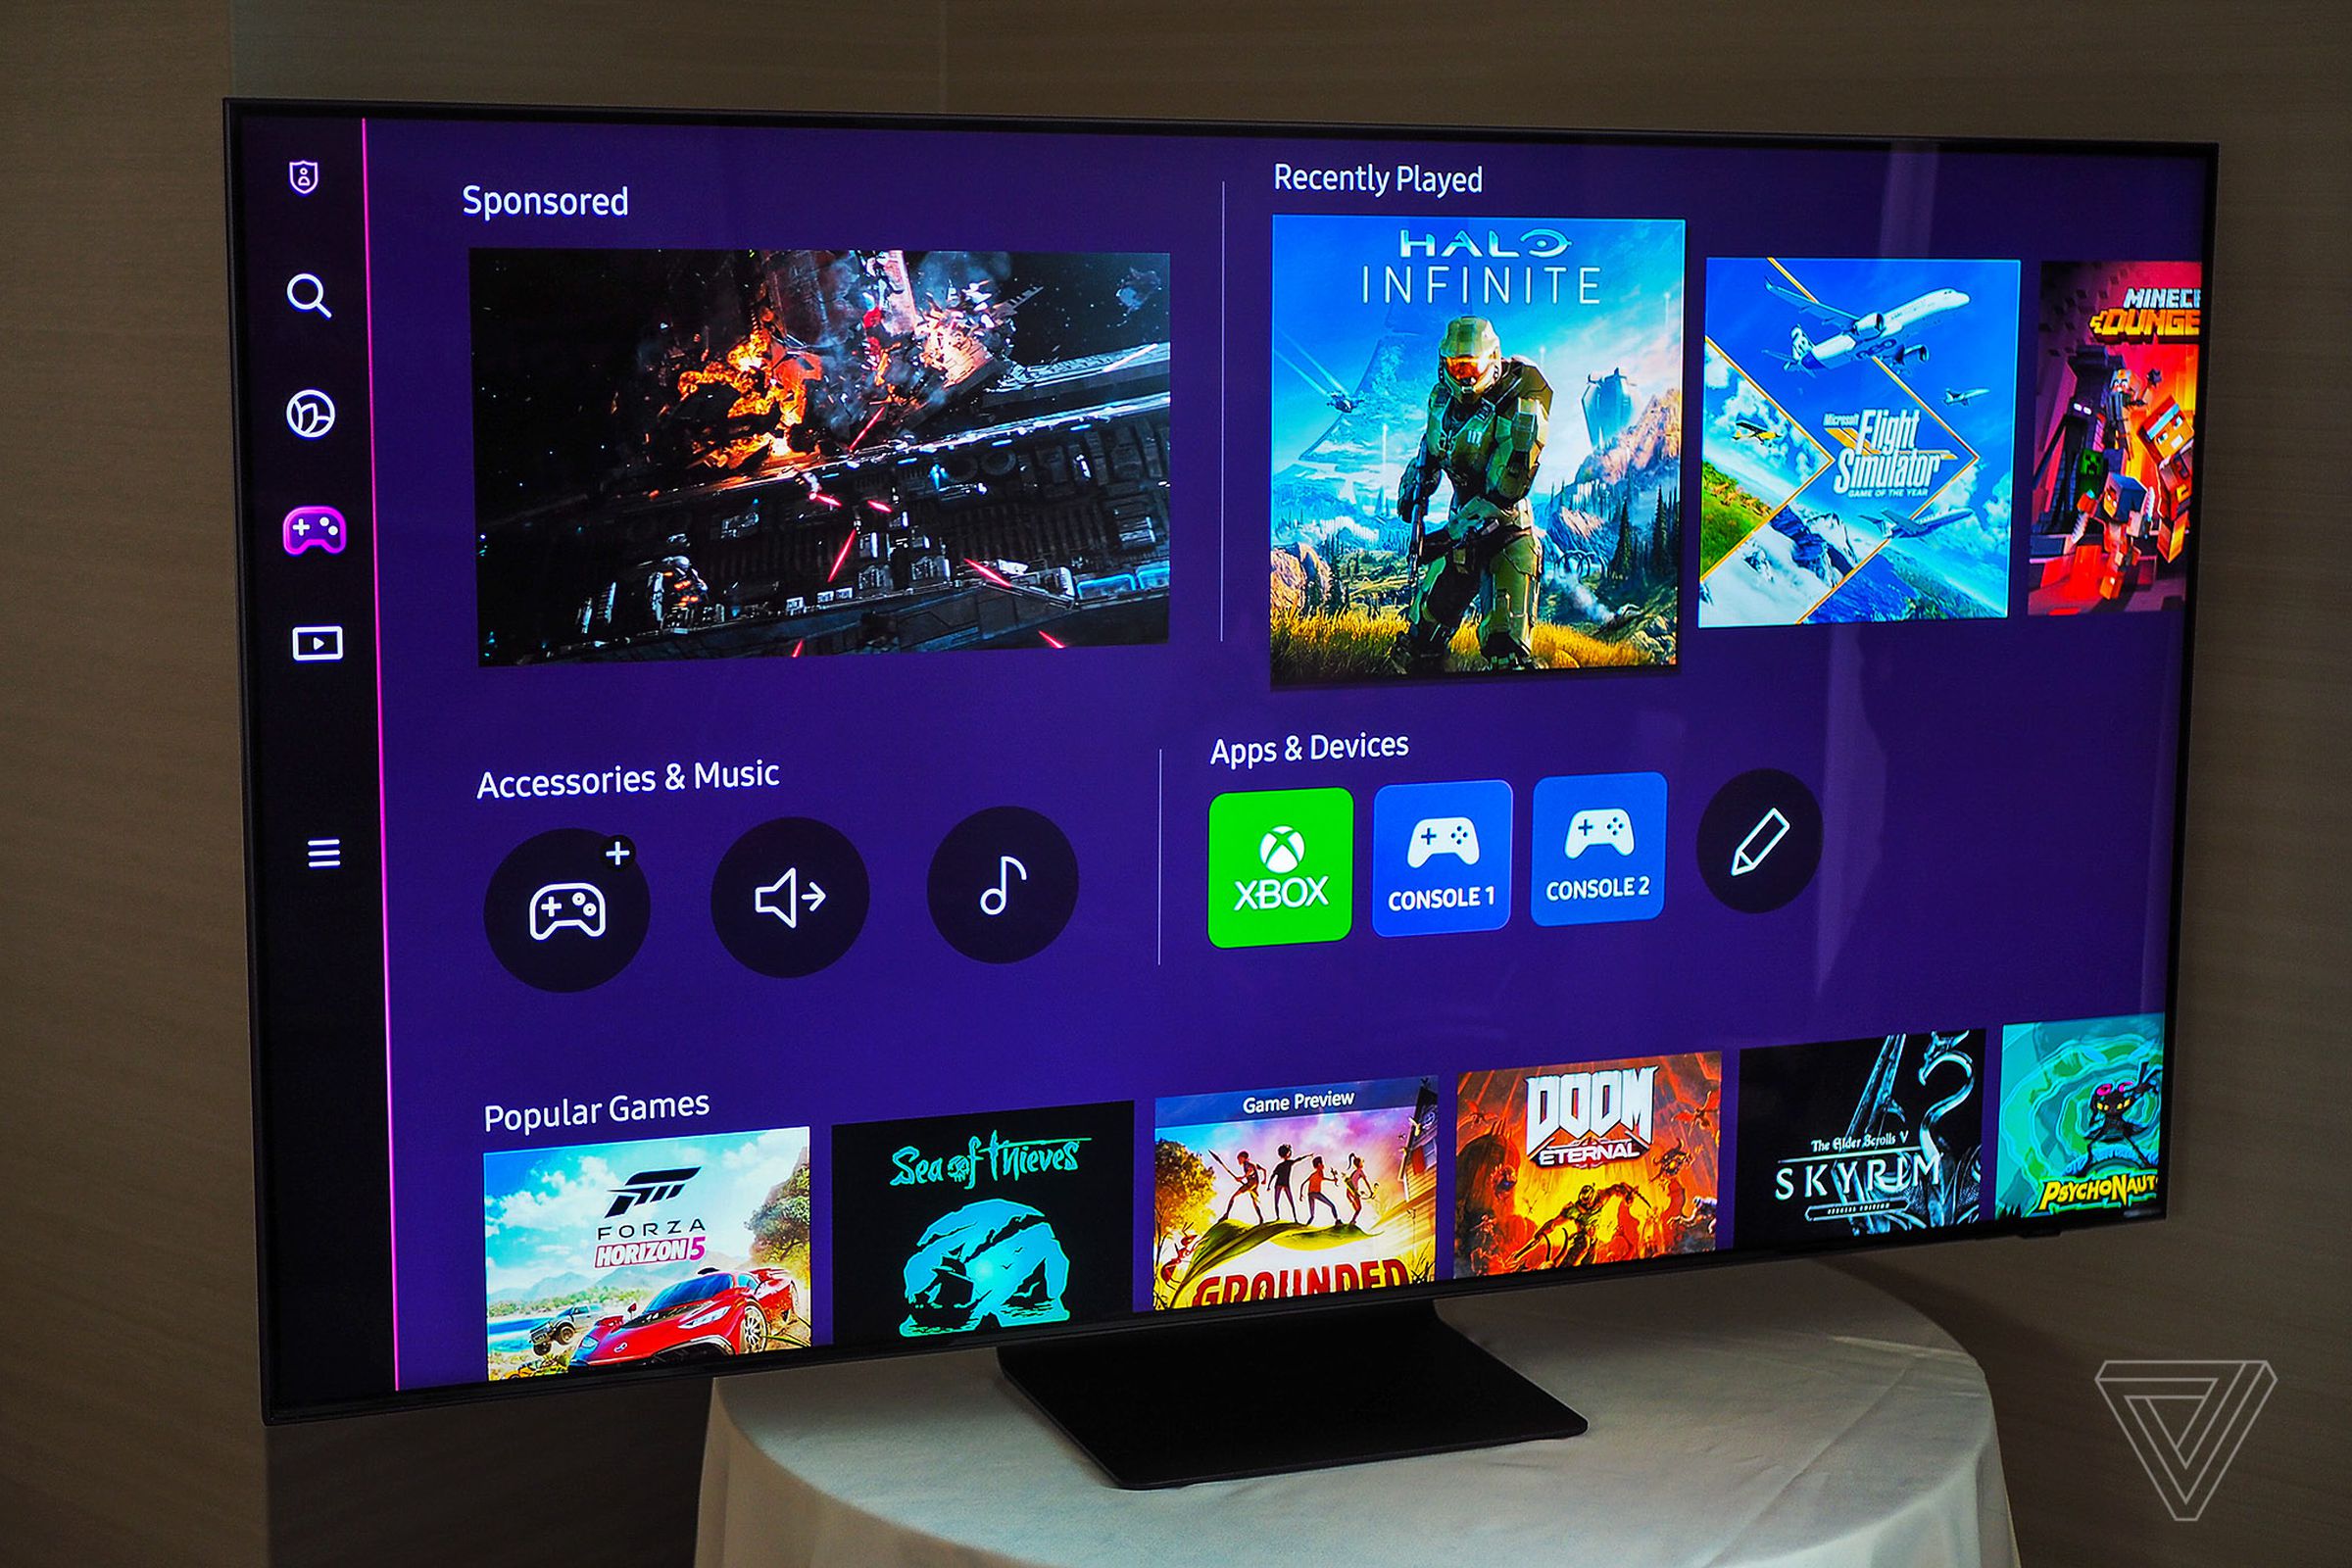 In the Samsung Gaming Hub, you can pair controllers and headphones, and easily jump into “recently played” titles.